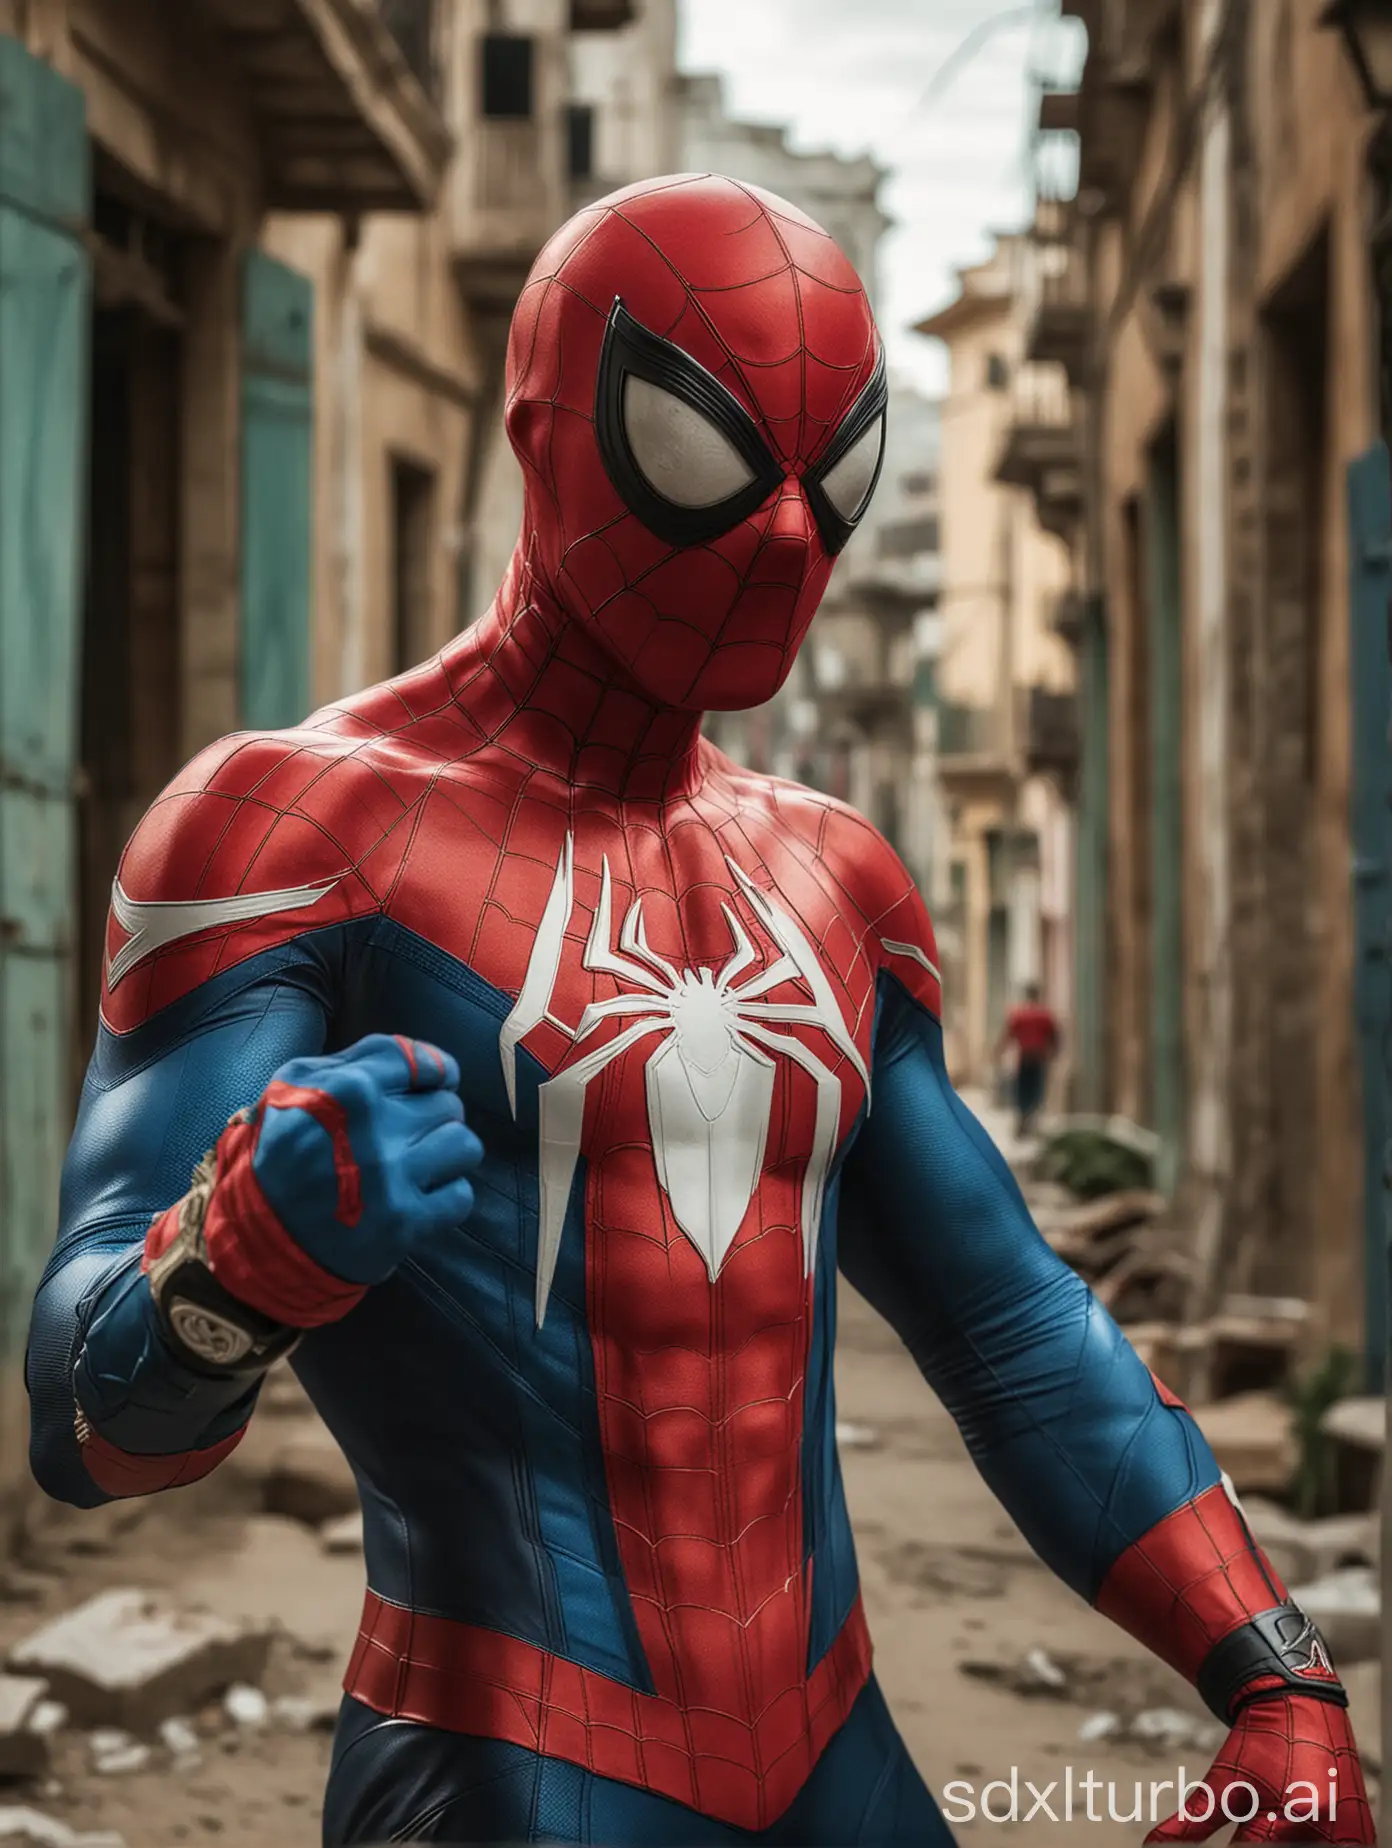 Spiderman Cuban flag colors suit and the mask off in his hand in a cool pose. showing his face and the mask in his hand